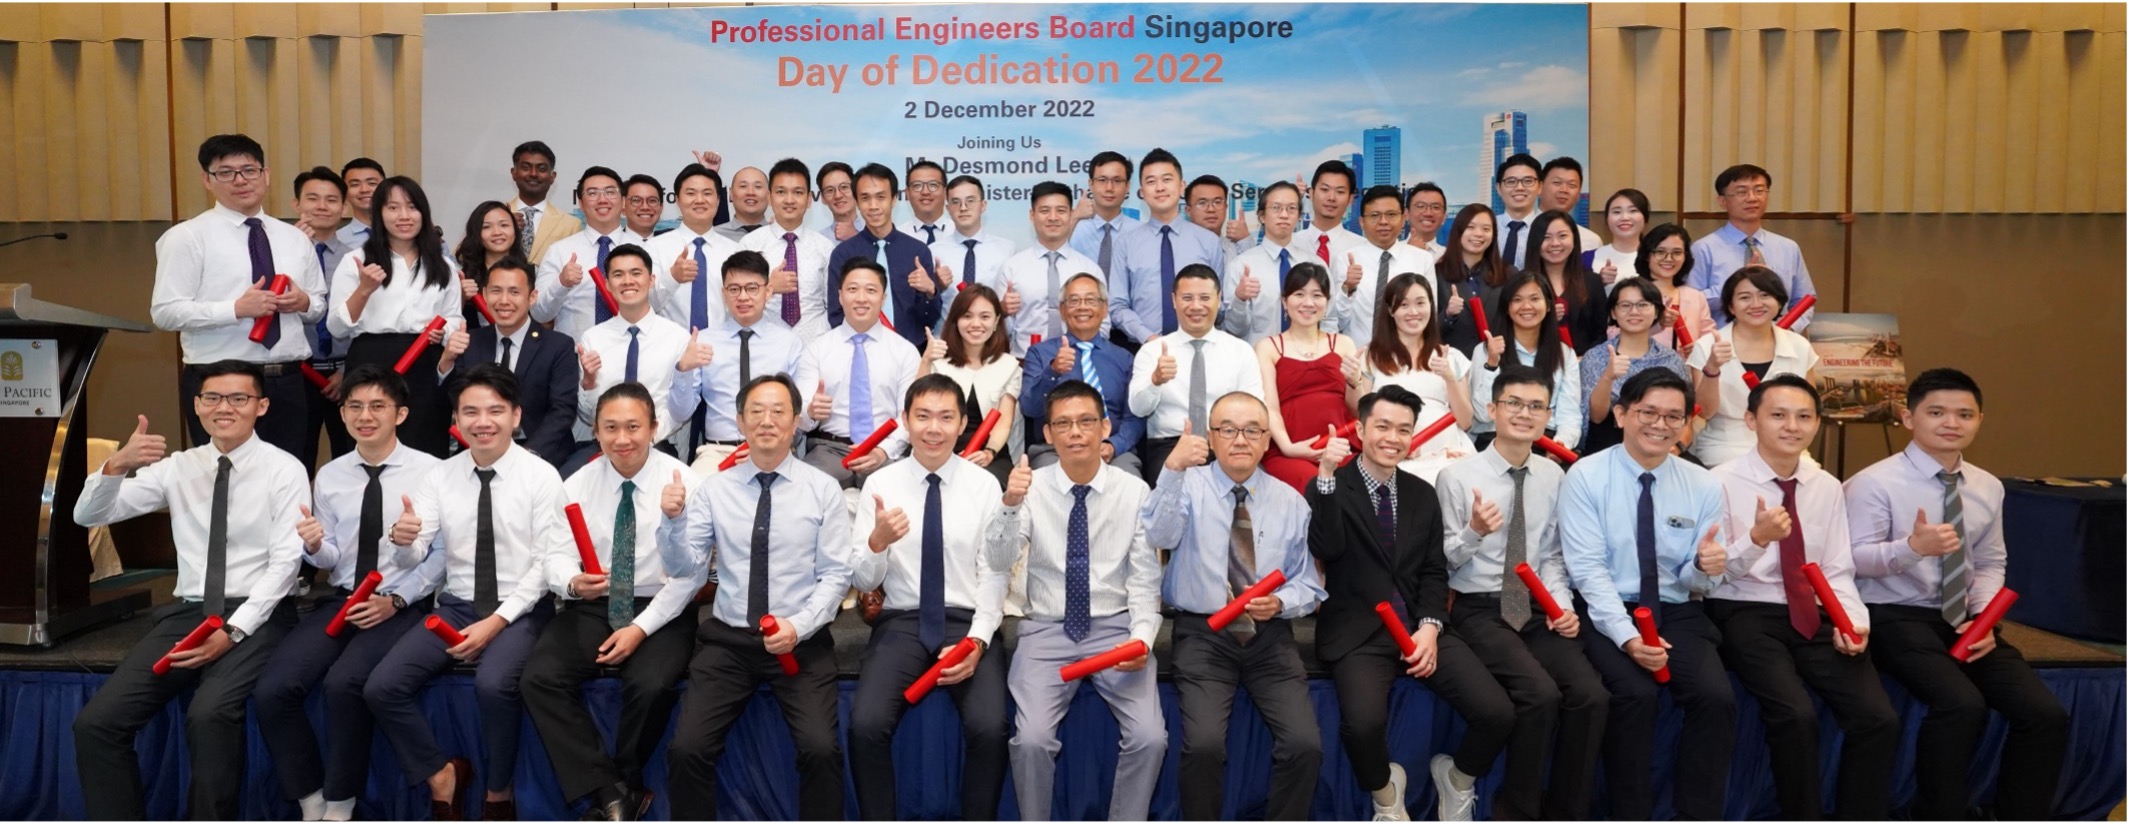 Congratulations to our 66 newly registered Professional Engineers for 2022.